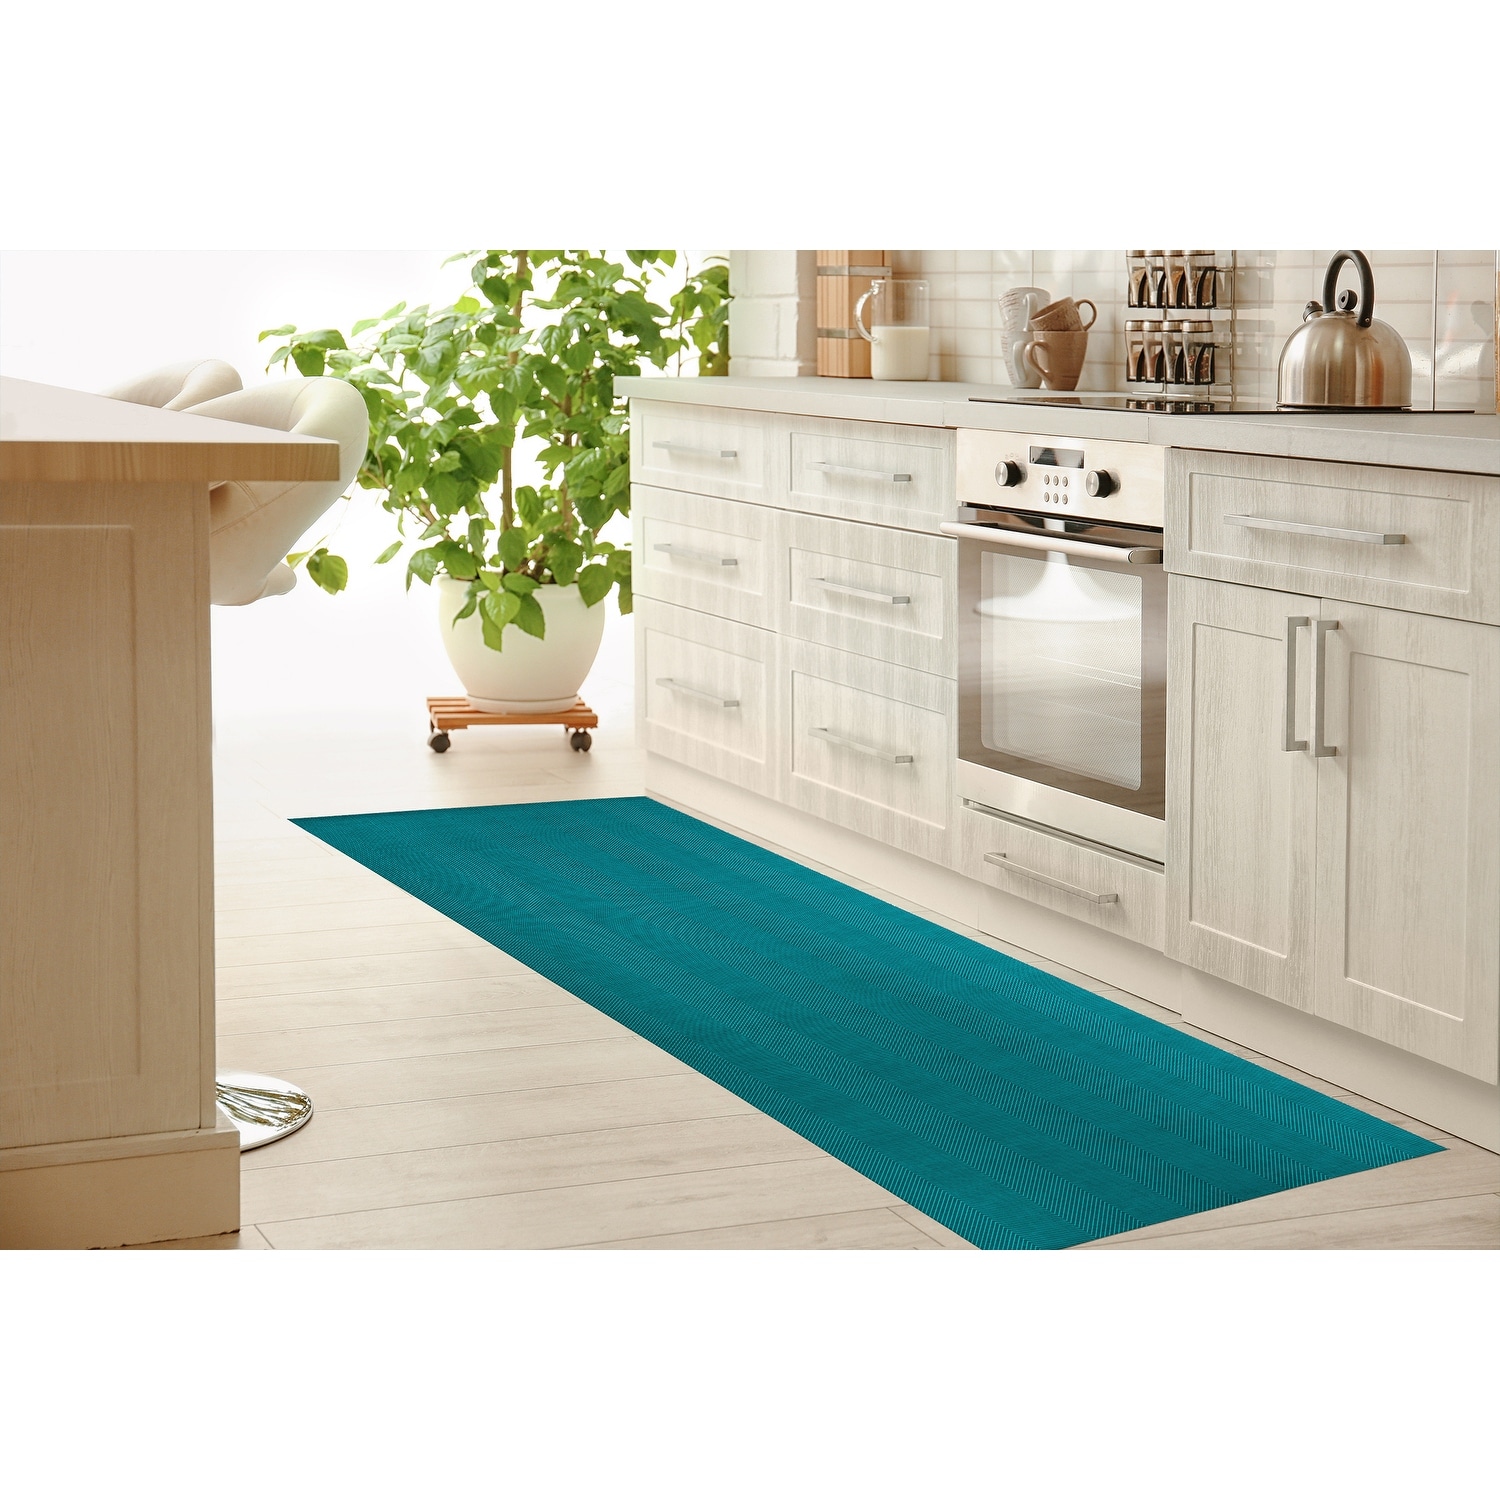 https://ak1.ostkcdn.com/images/products/is/images/direct/5f83a4fa2953391e091296543999aa51302debfa/STITCHED-ZIG-ZAG-TRIBAL-TURQUOISE-Kitchen-Mat-By-Becky-Bailey.jpg